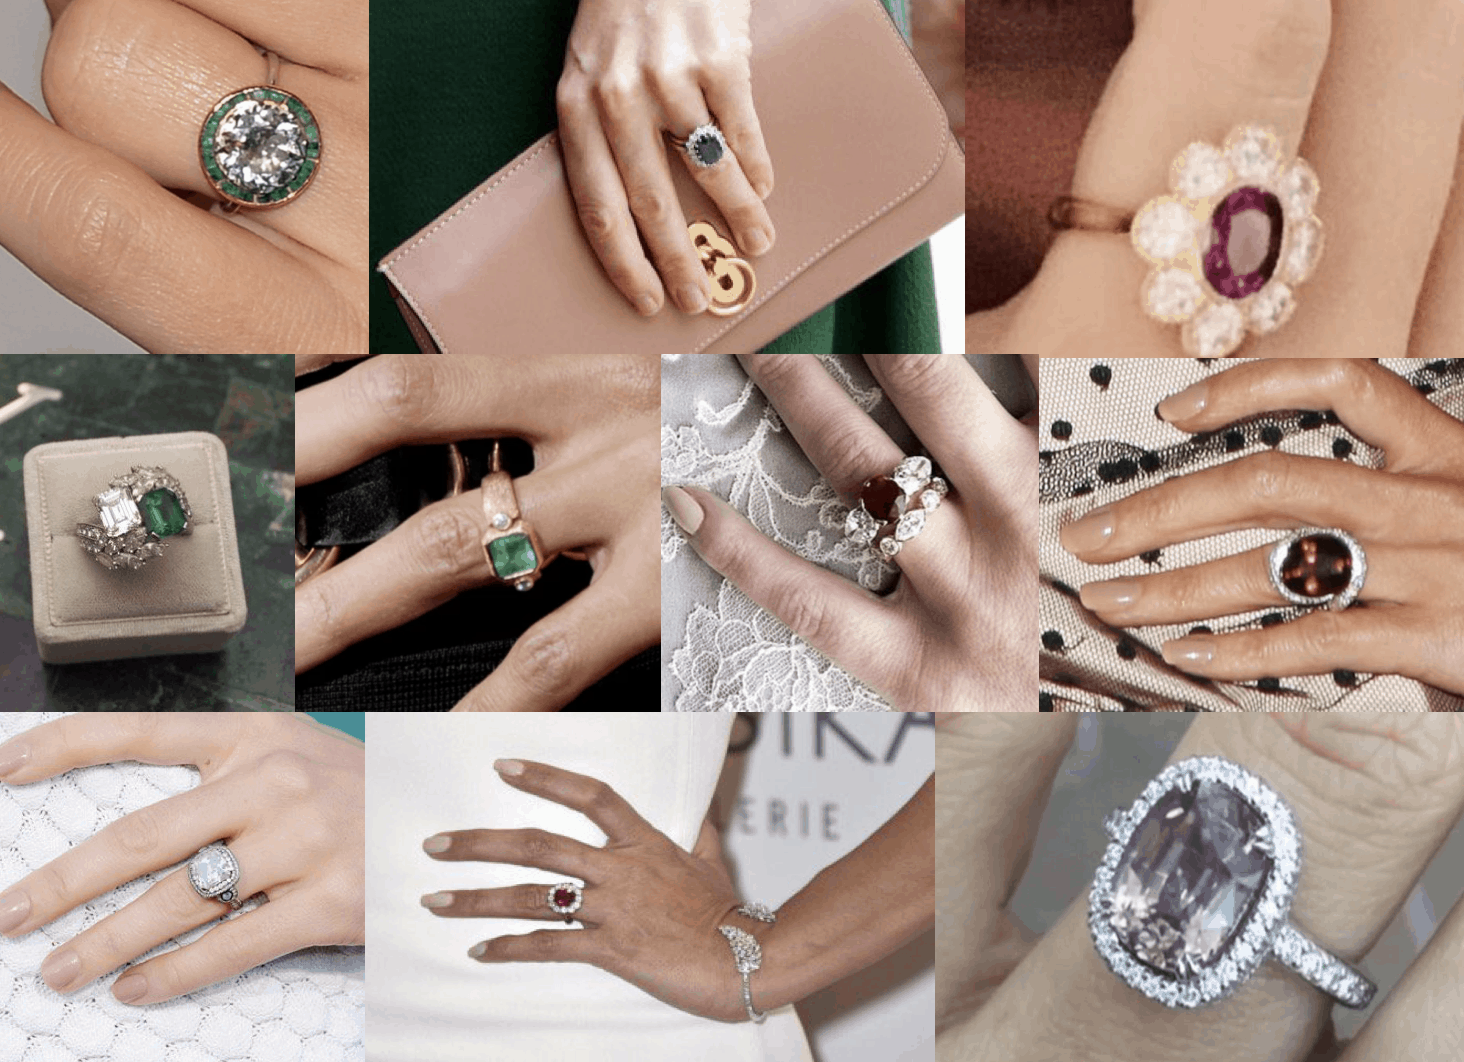 What's your favorite celeb engagement ring? : r/EngagementRings